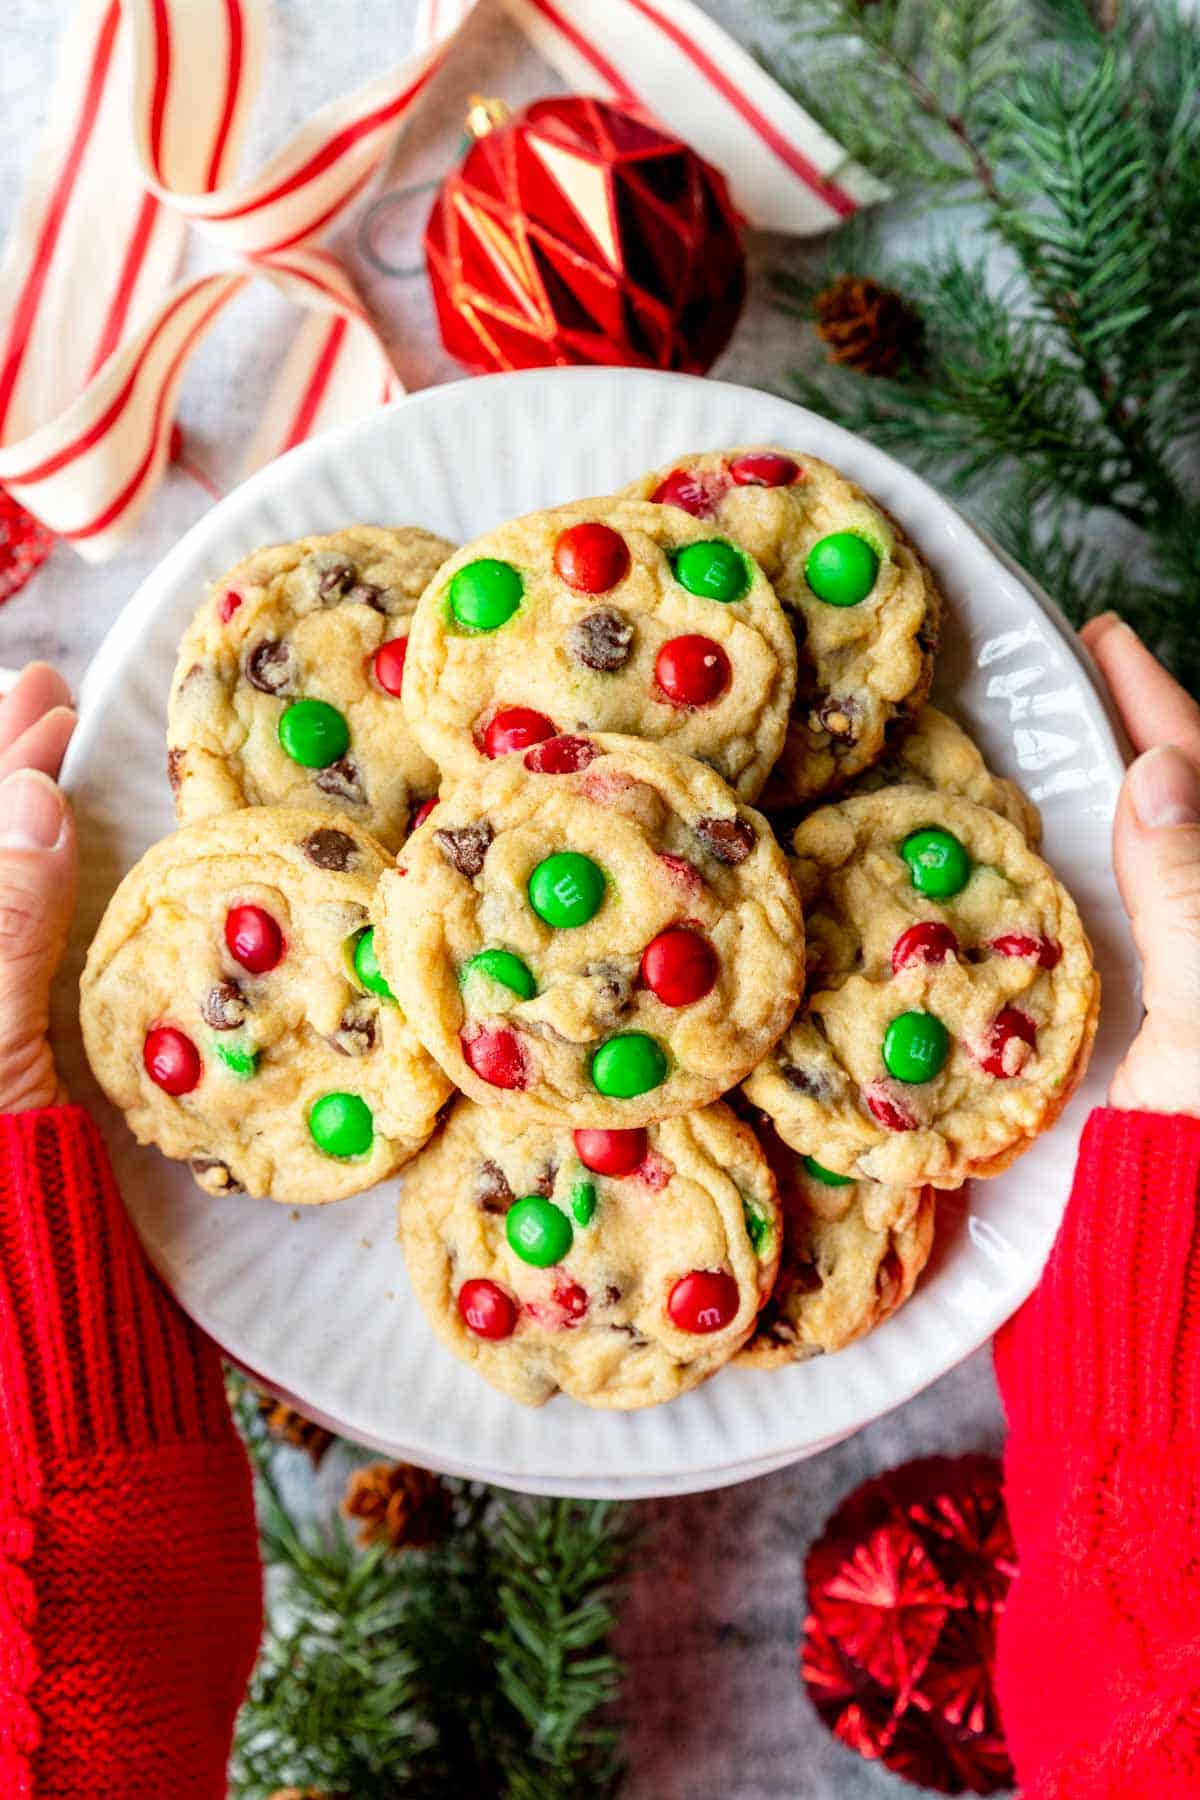 A plate of Christmas Chocolate Chip Cookies with red and green M&M's